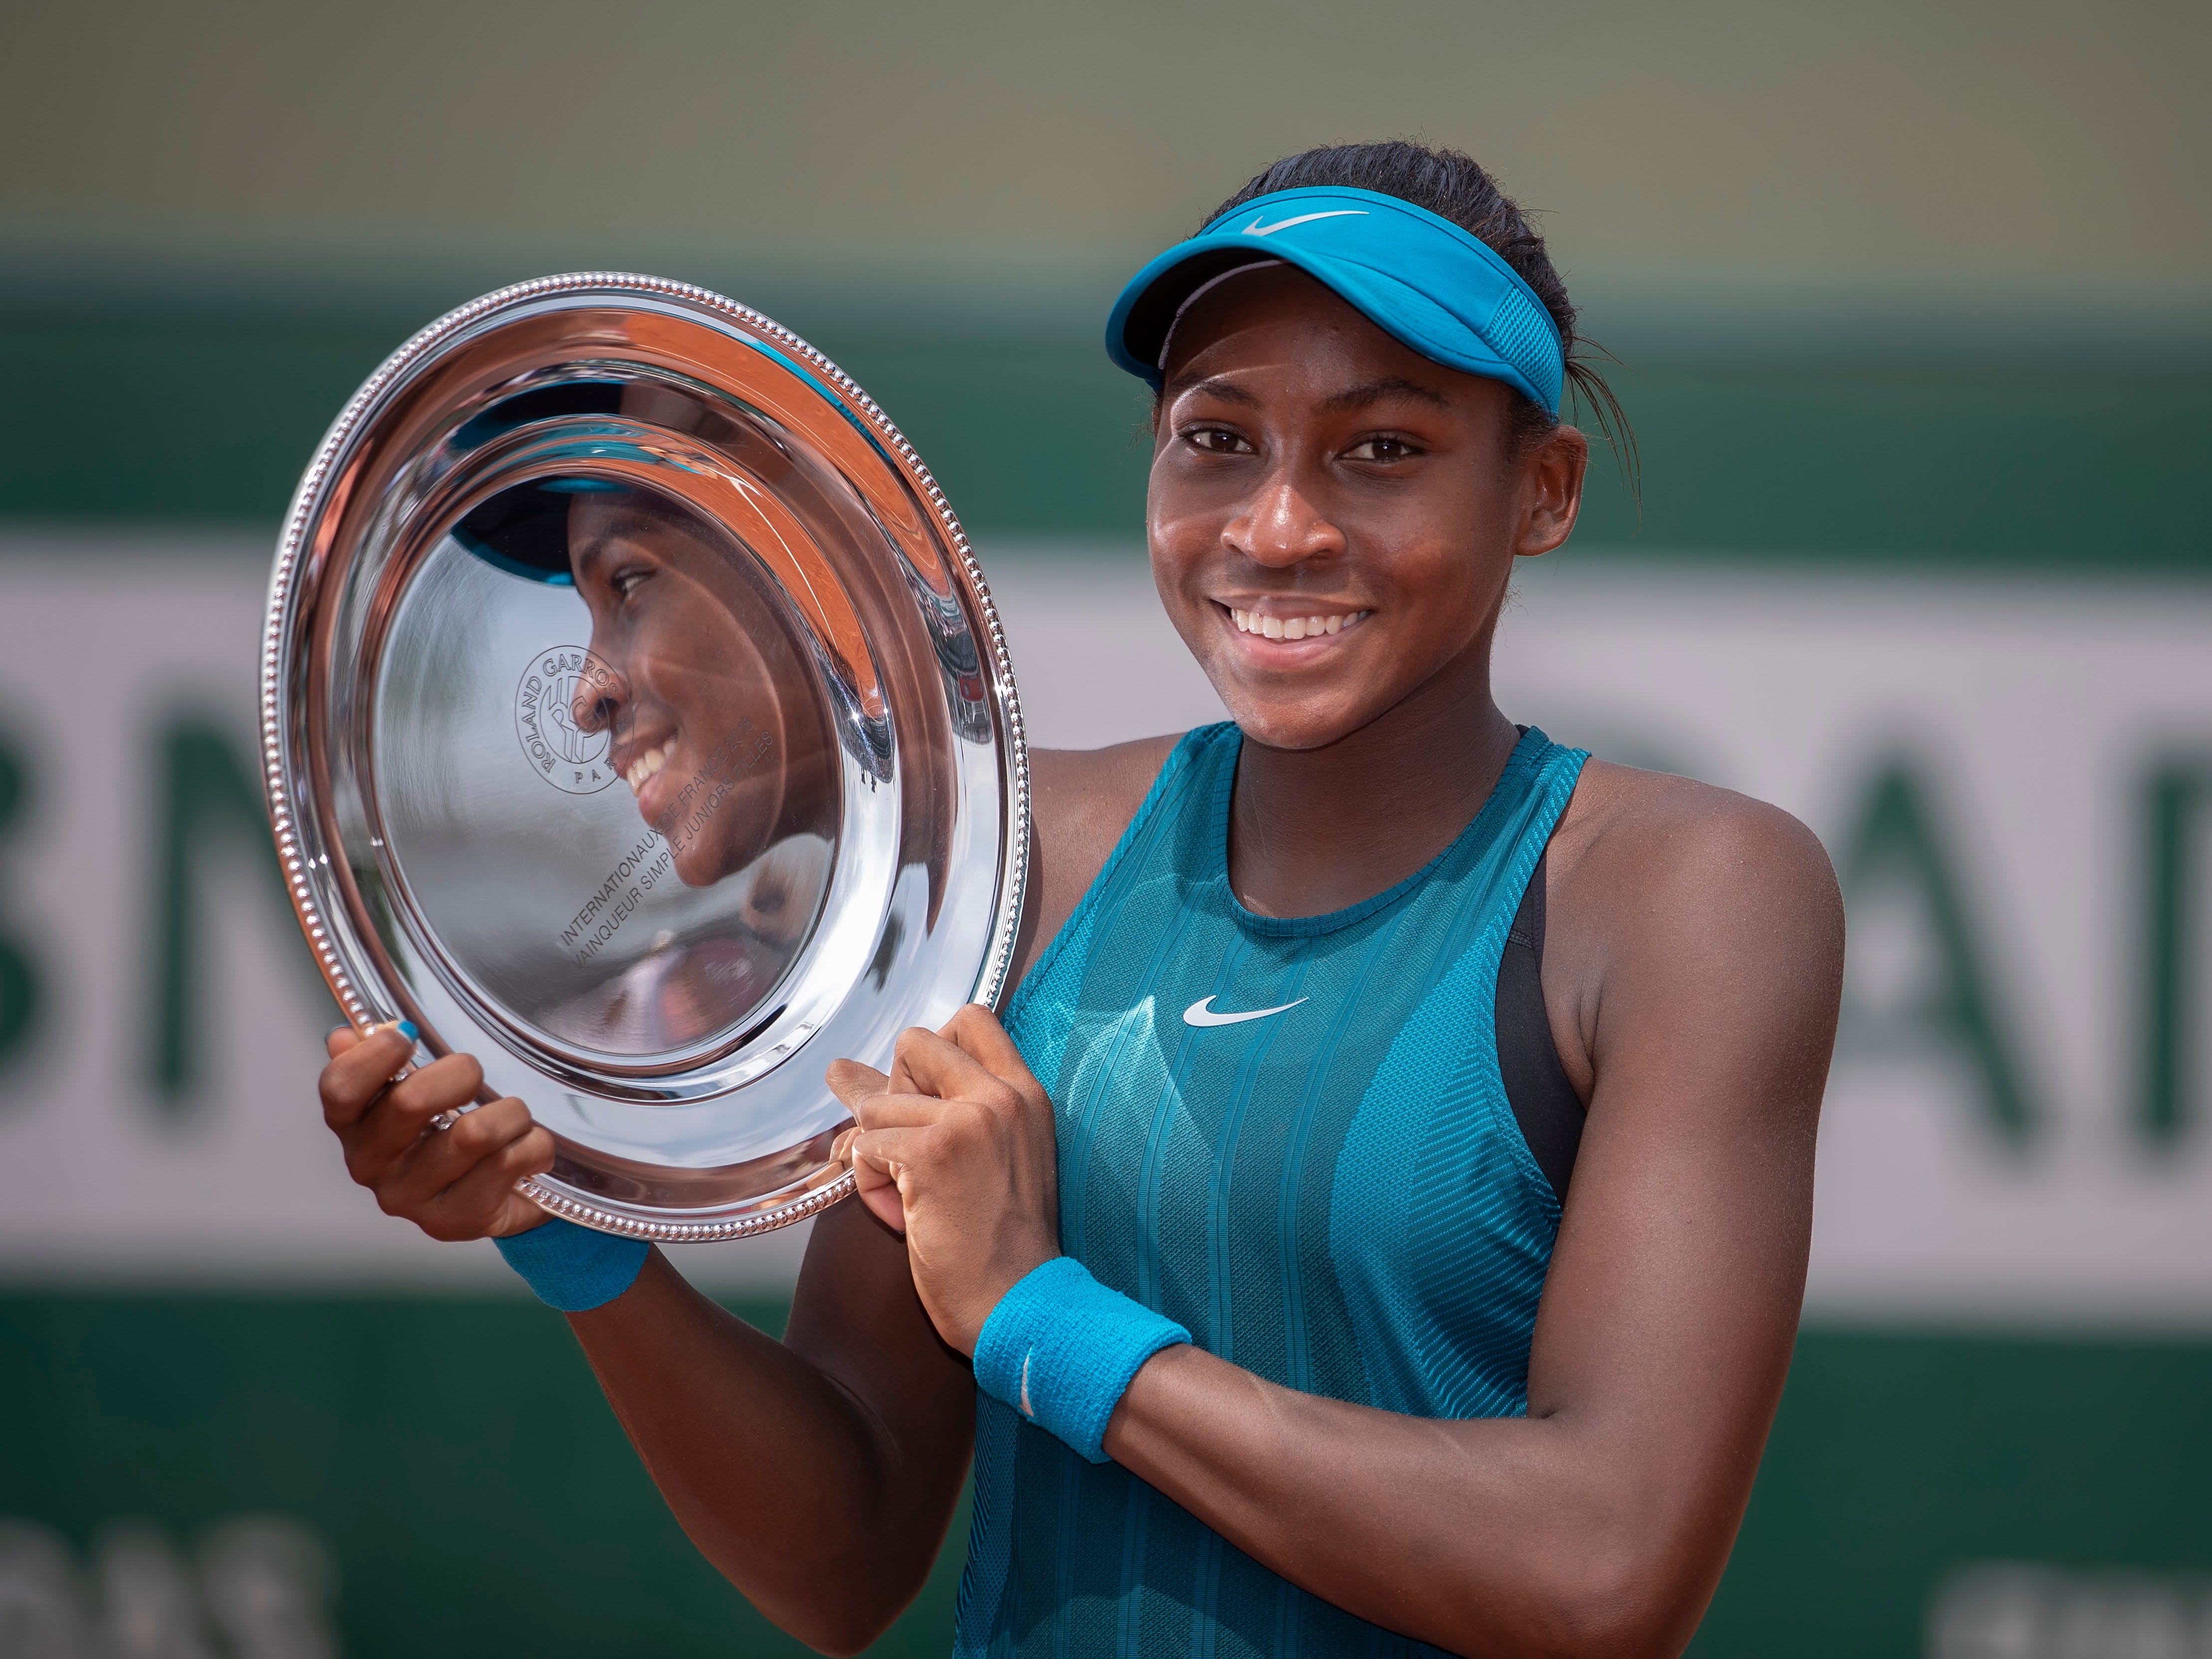 Coco Gauff poses with the trophy after winning her junior girls' final against Caty McNally at the 2018 French Open.